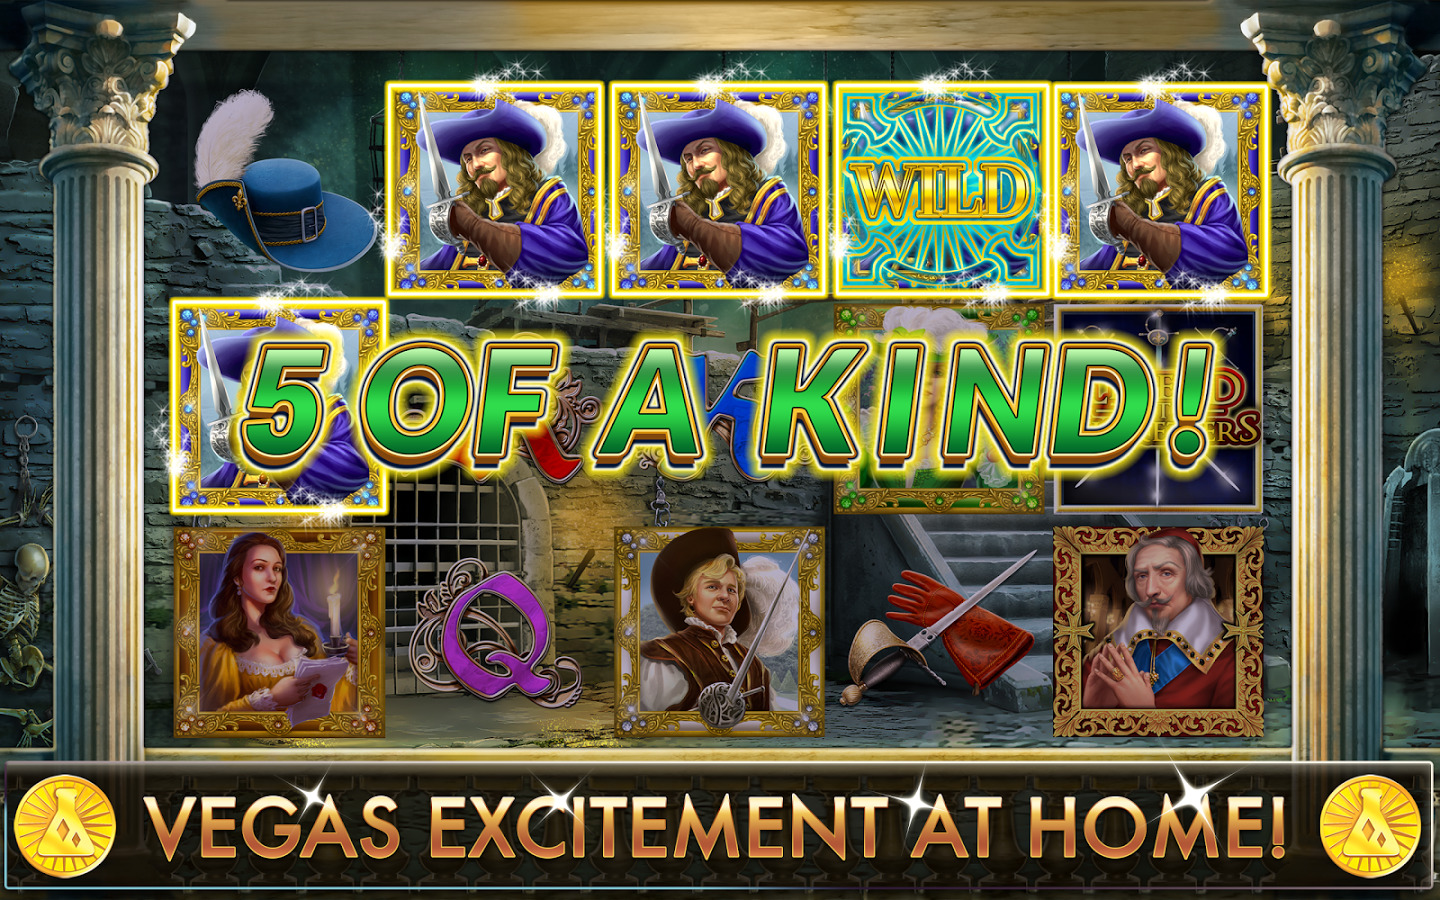 The Three Musketeers slots winning 5 of a kind